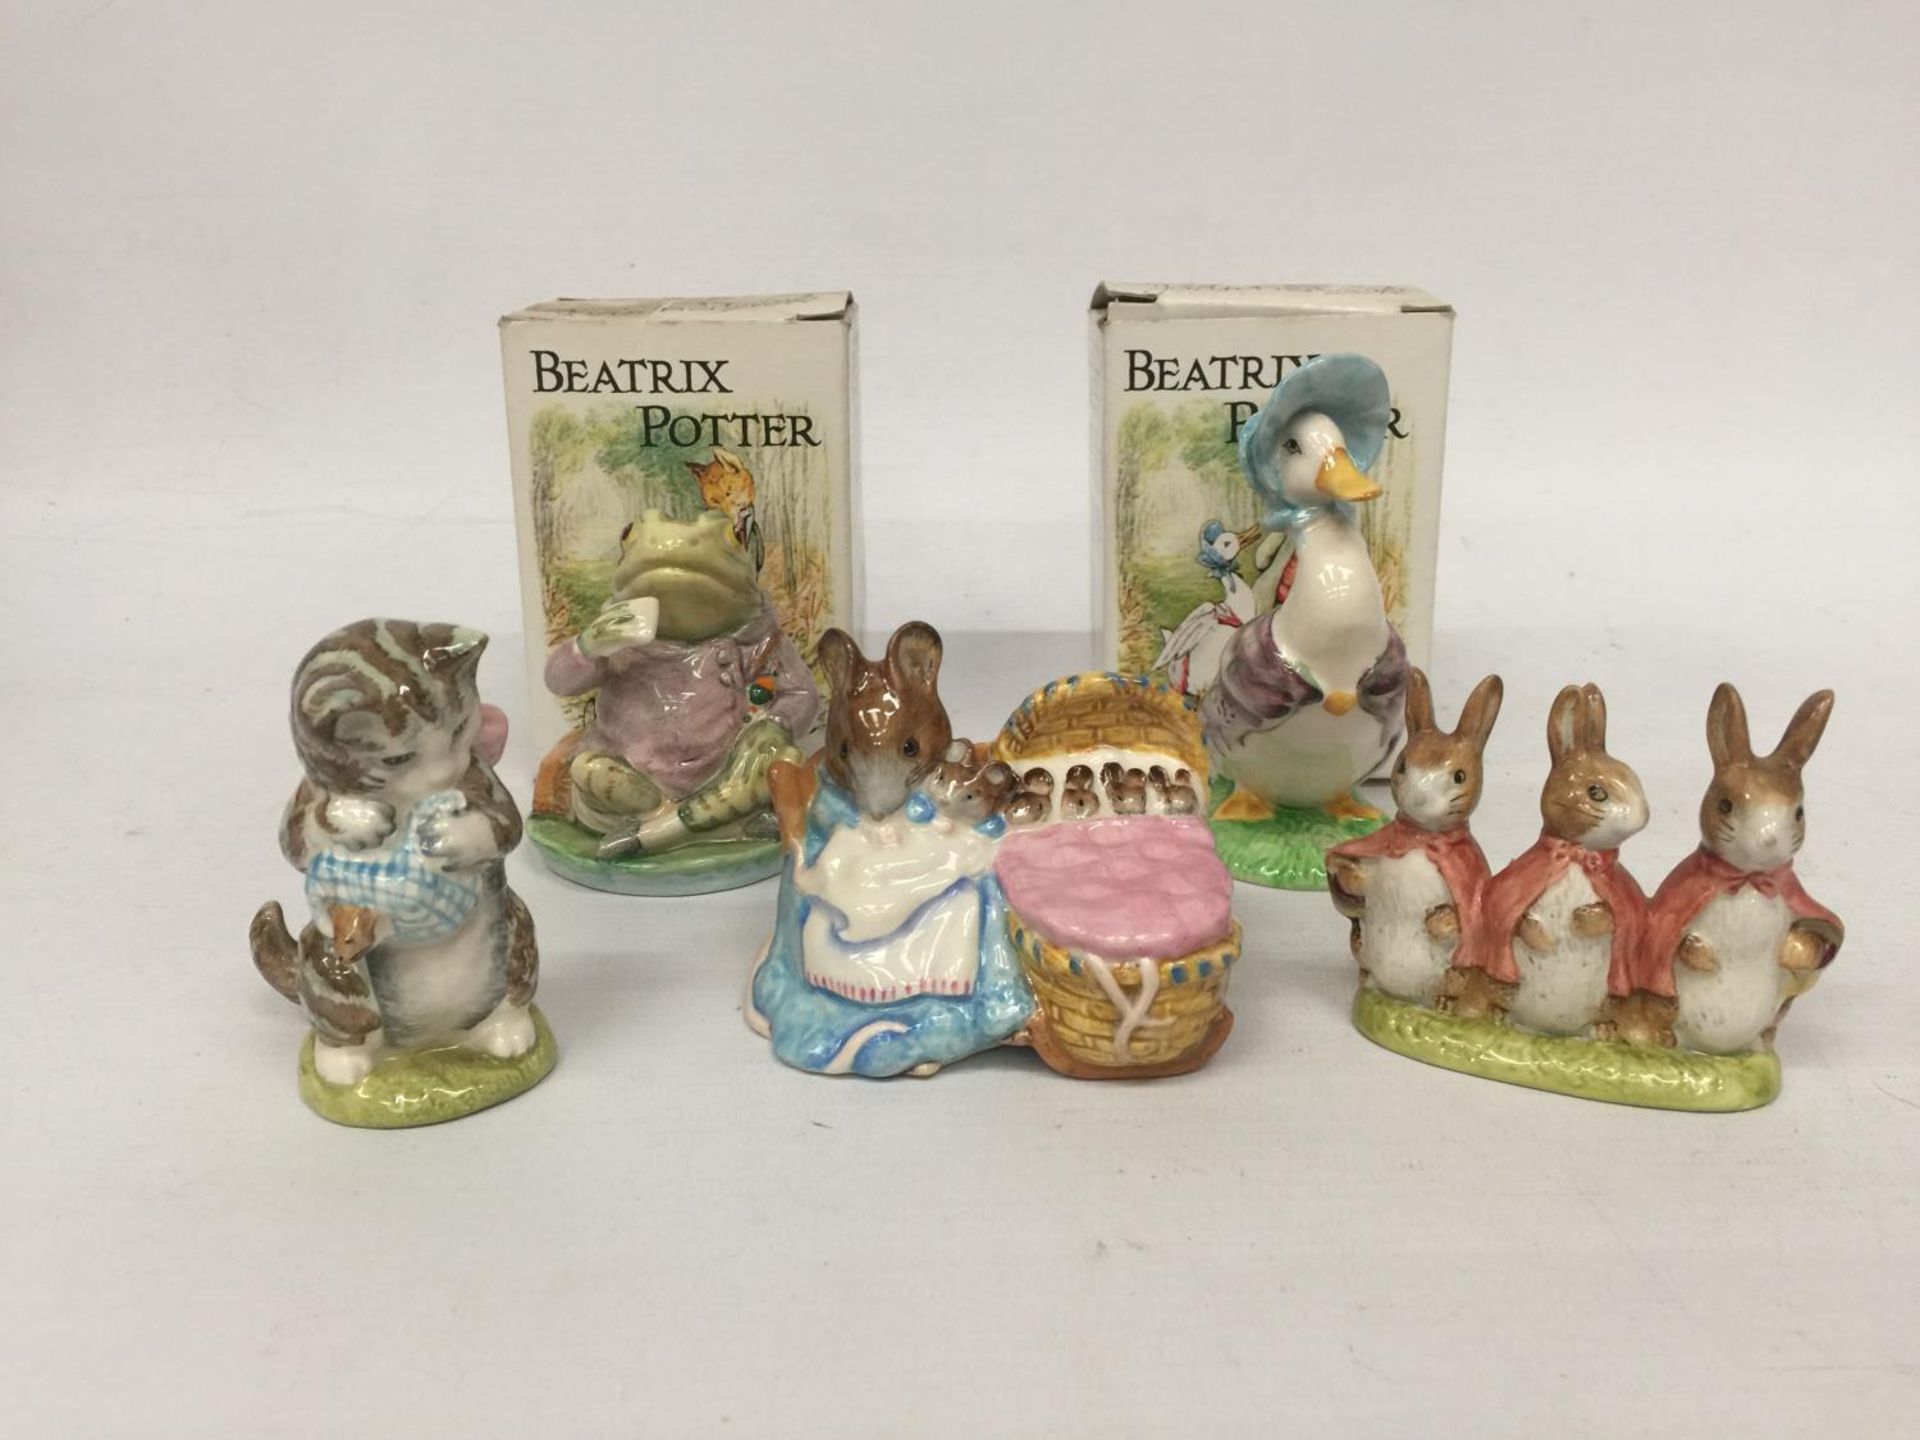 FIVE BESWICK BEATRIX POTTER FIGURES TO INCLUDE MISS MOPPET, JEREMY FISHER, MUNCO MUNCO, FLOPSY MOPSY